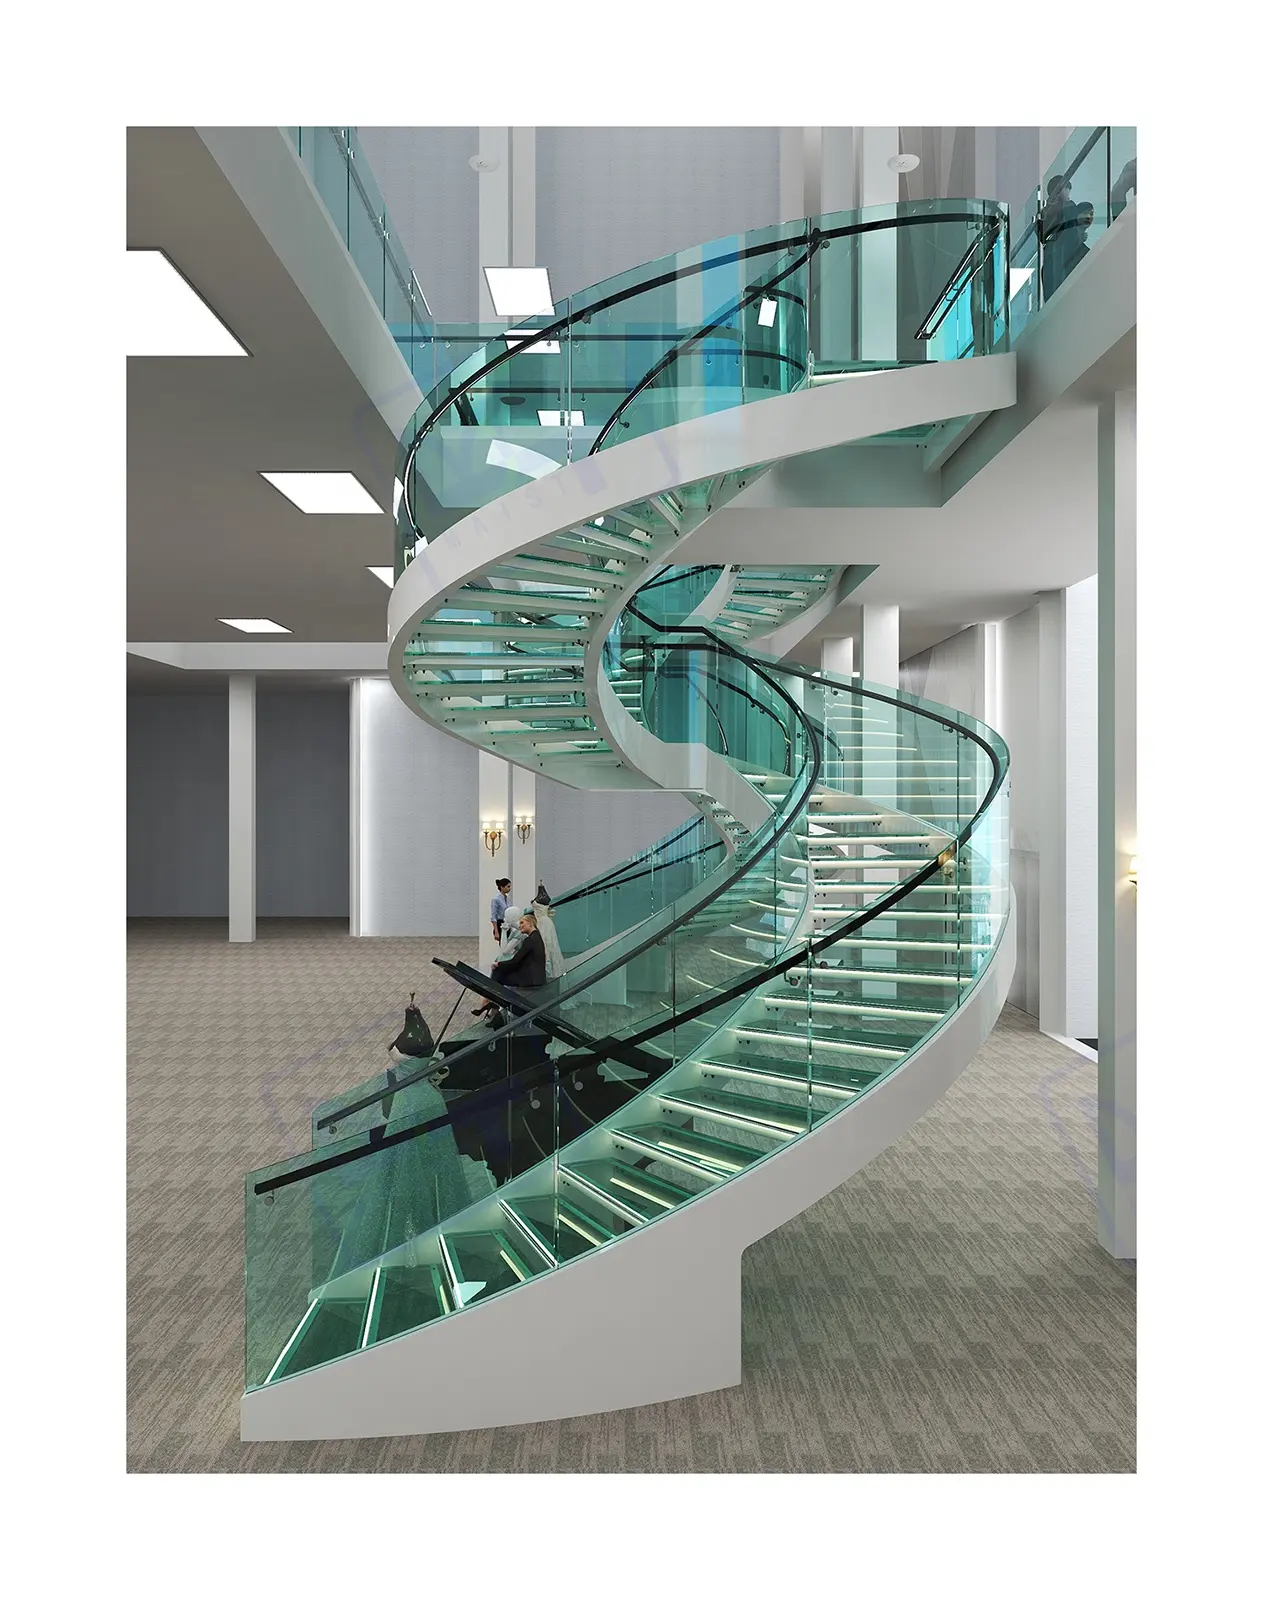 New Installation Structure Of Laminated Tempered Glass Stainless Steel Rails Stairs "Maist" Staircase Company Patented Products